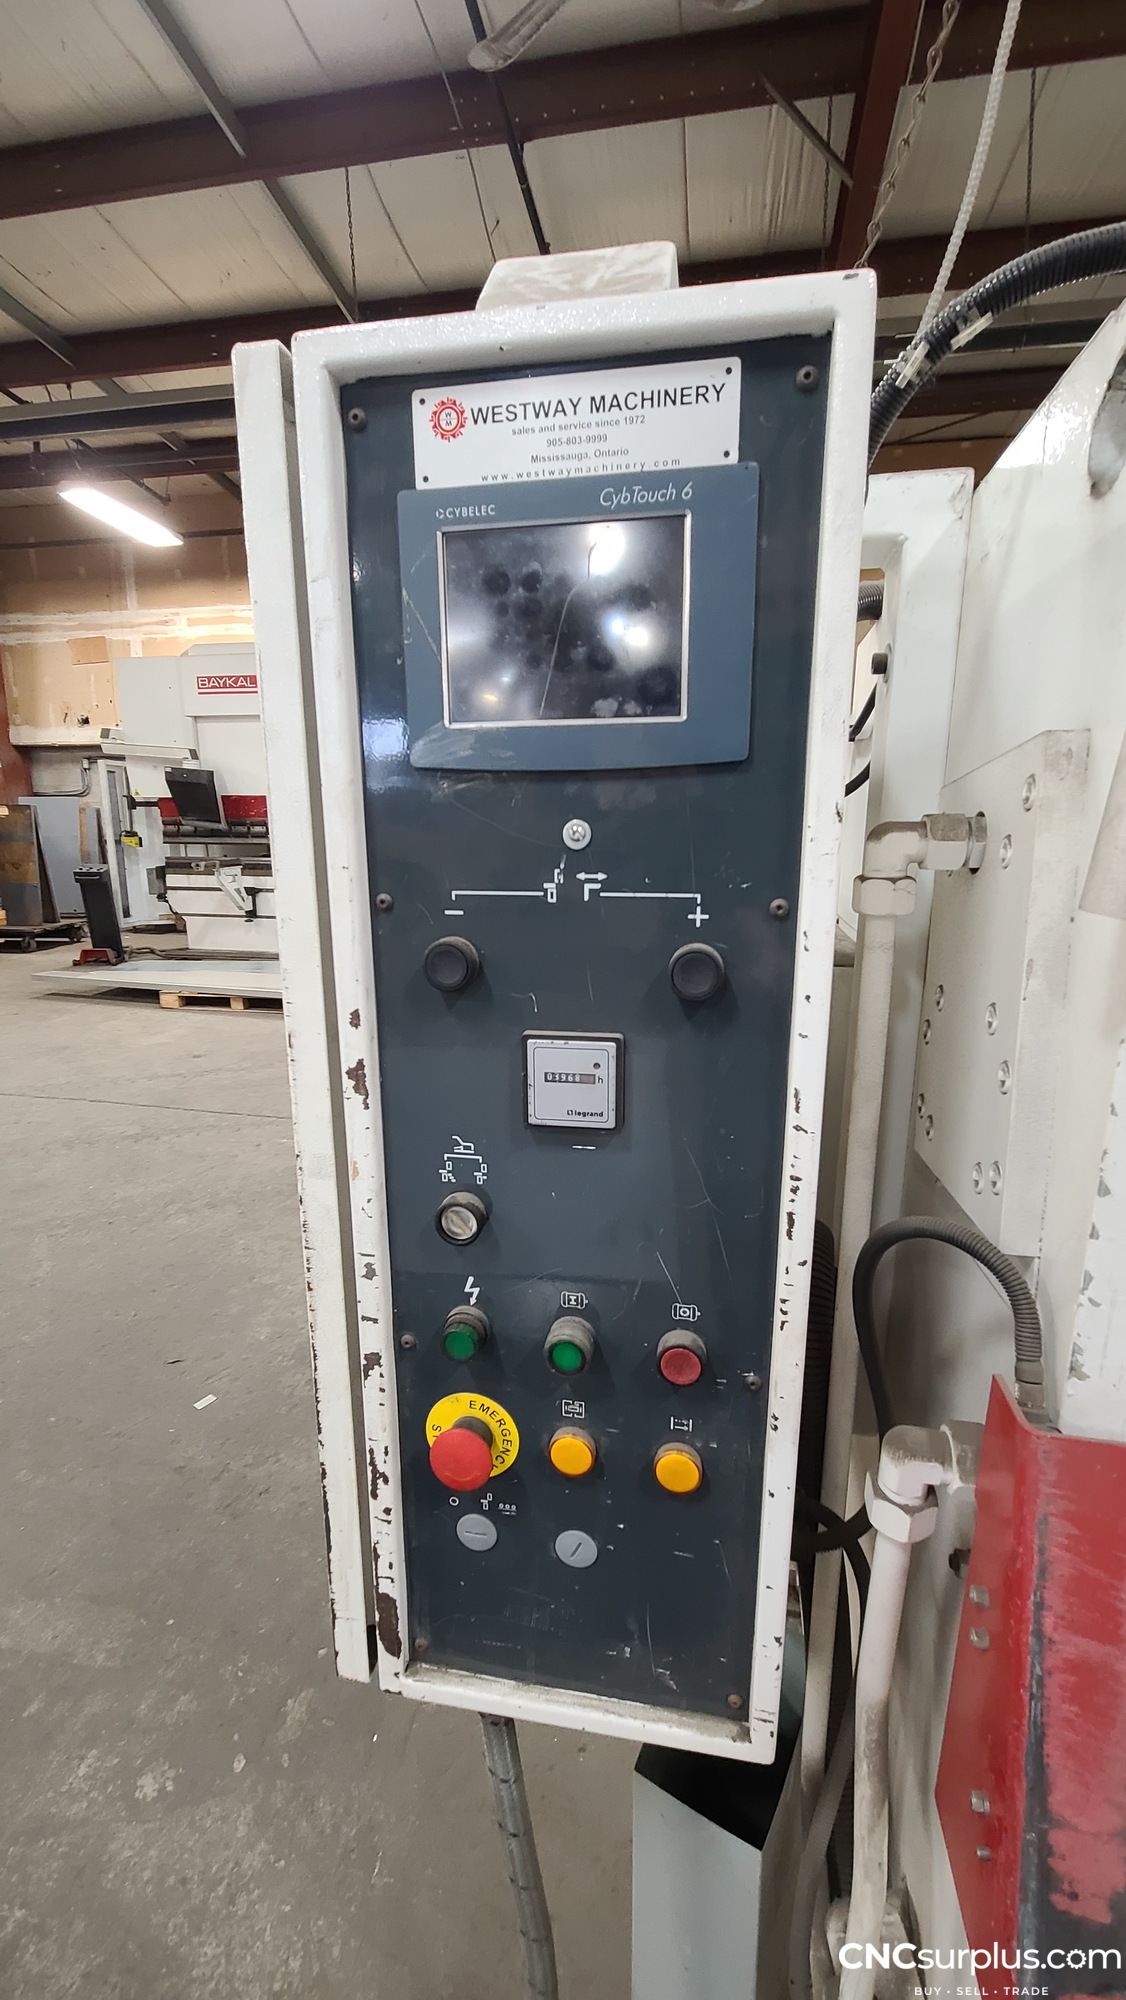 2014 BAYKAL HGL 3766 Power Squaring Shears (Inch) | CNCsurplus, A Div. of Comtex Leasing Corp.